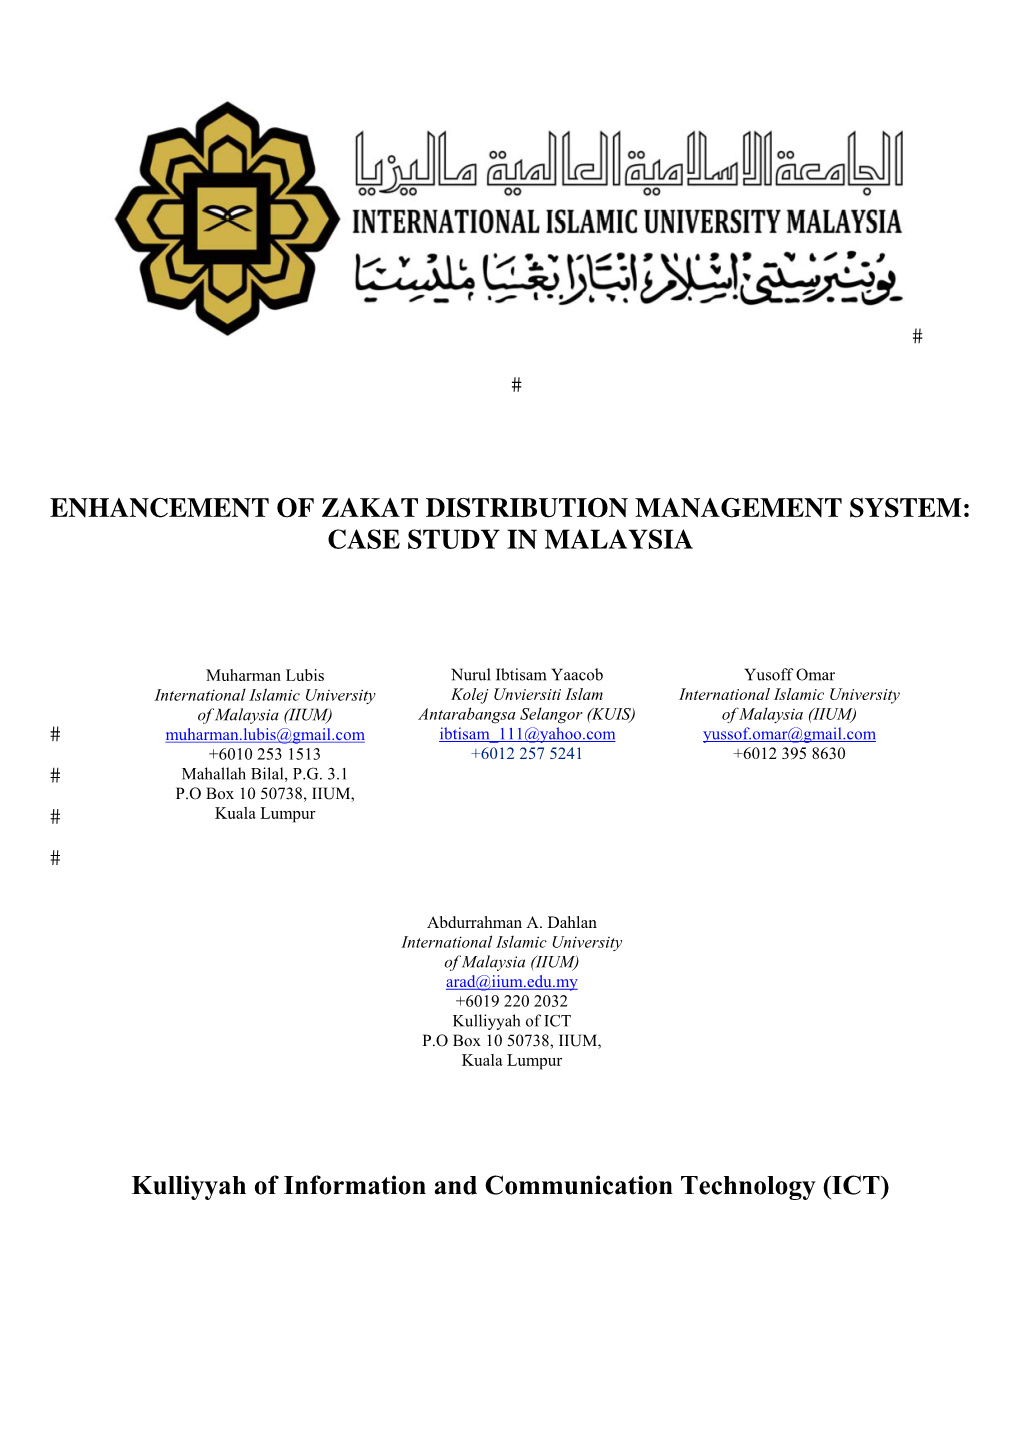 Enhancement of Zakat Distribution Management System: Case Study in Malaysia